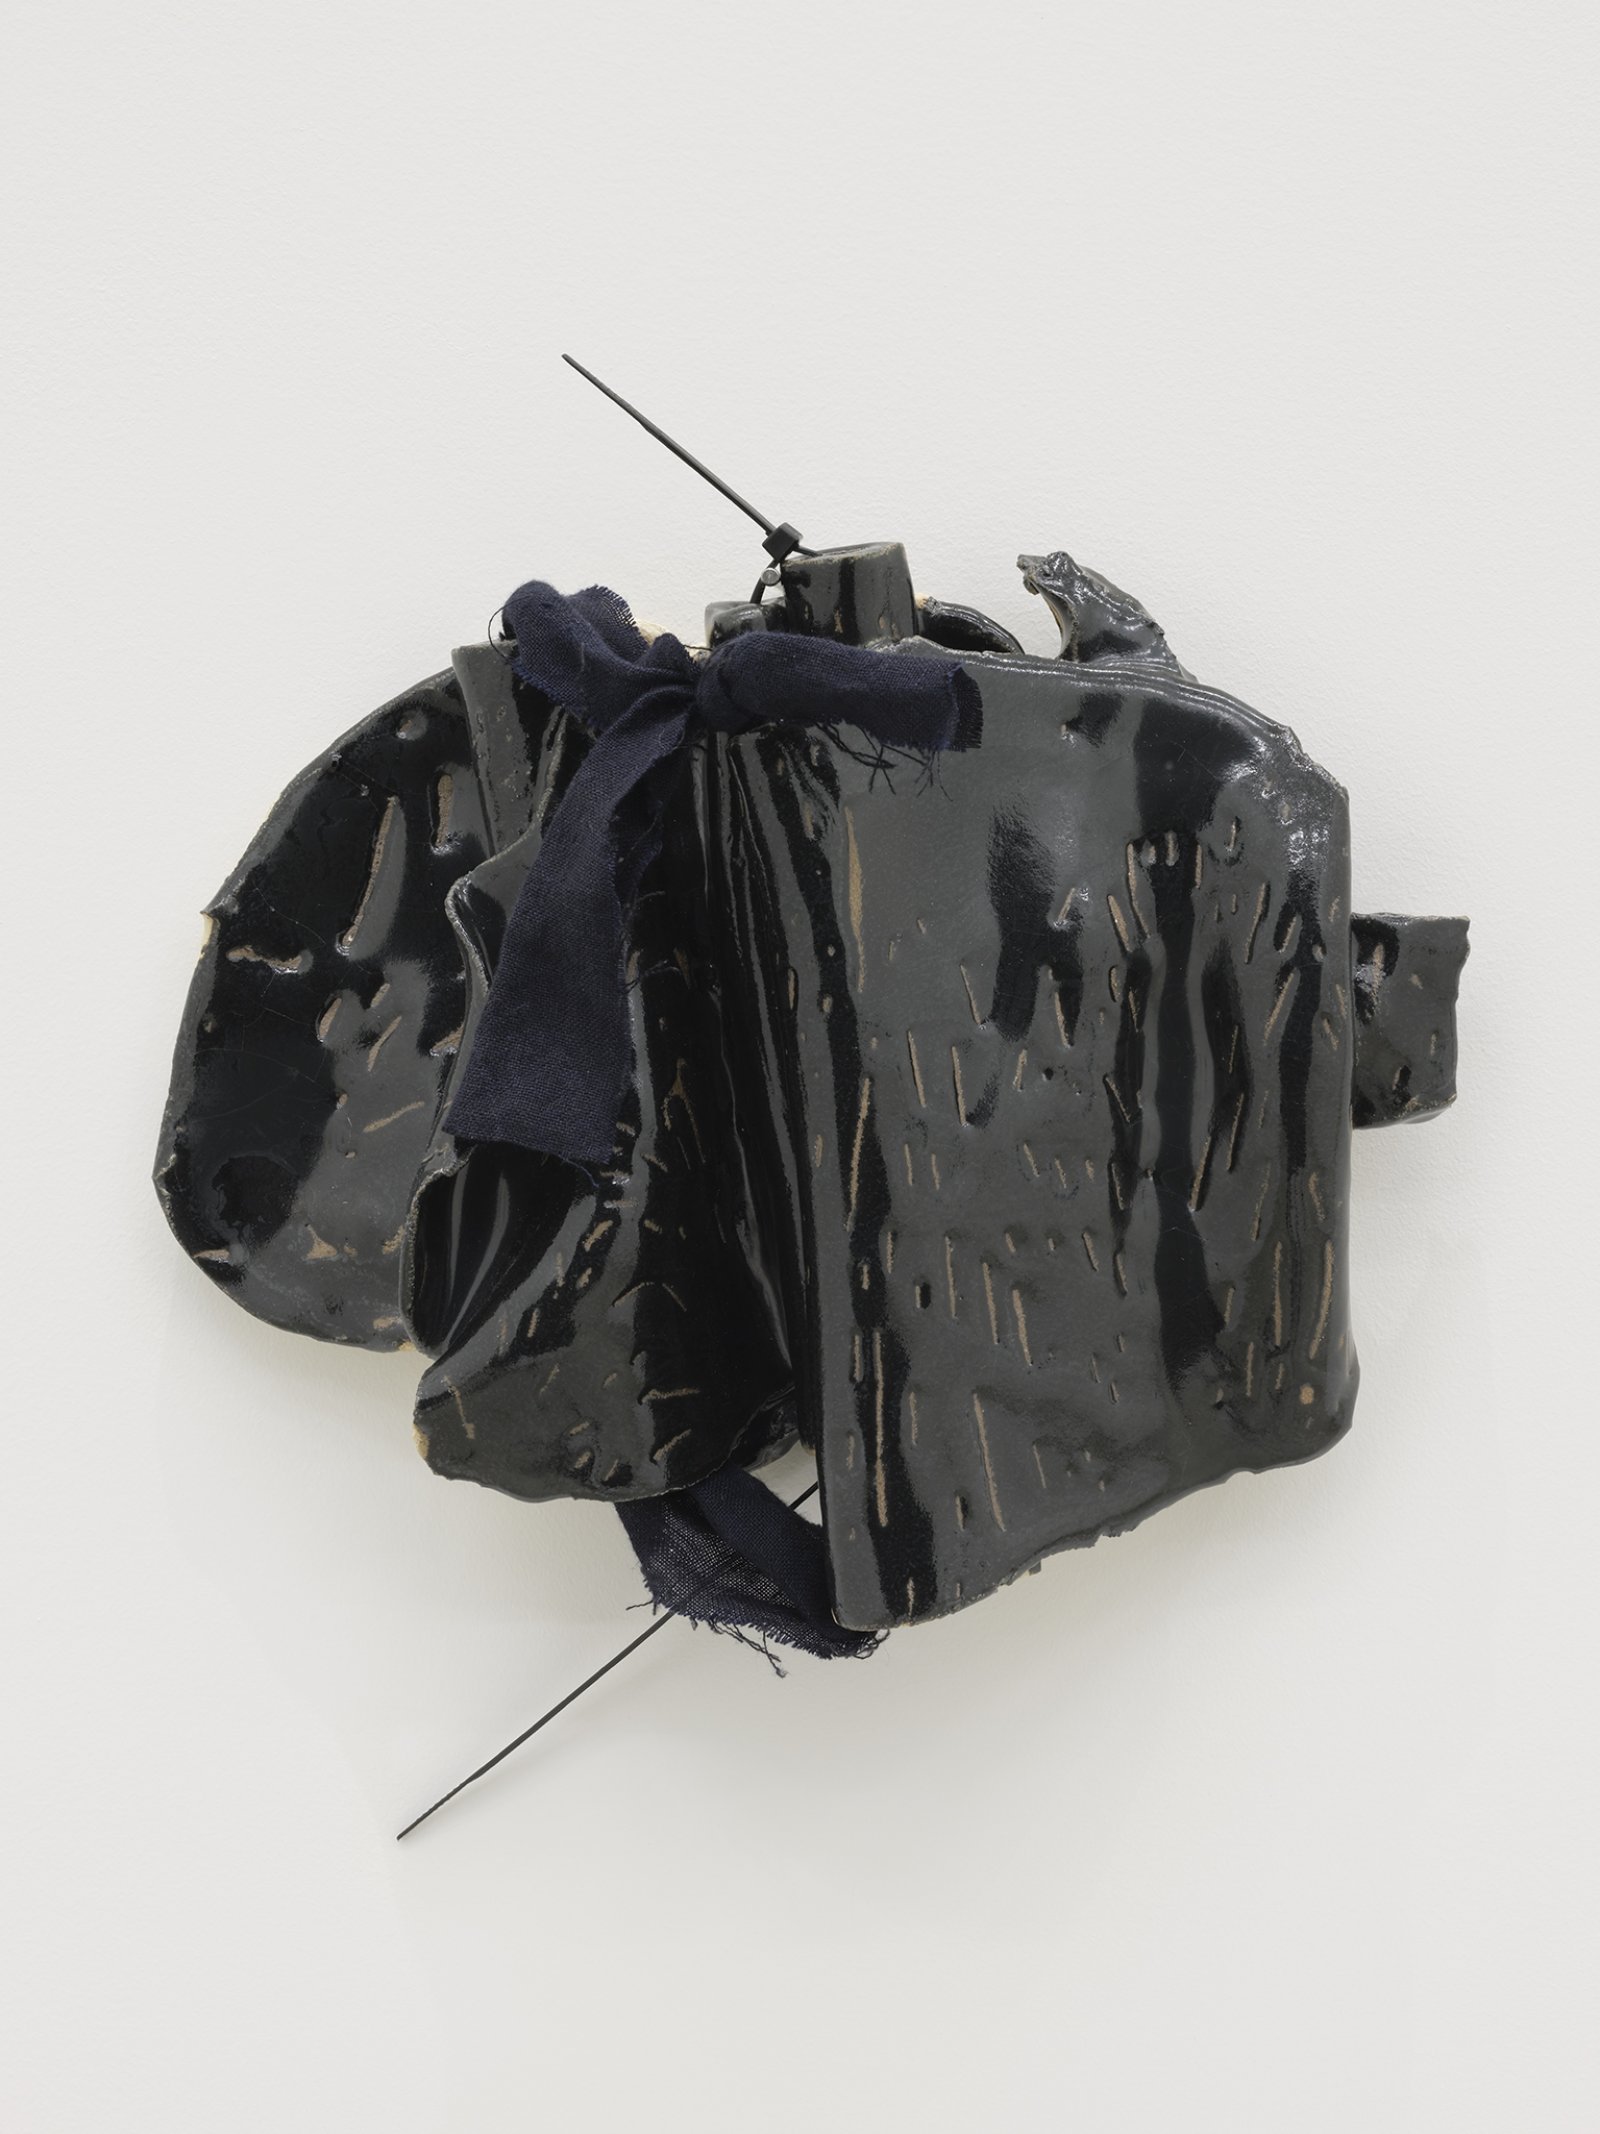 ​Christina Mackie, Token no. 10, 2019, stoneware, linen, cable ties, nail, 14 x 13 in. (36 x 32 cm) by Christina Mackie